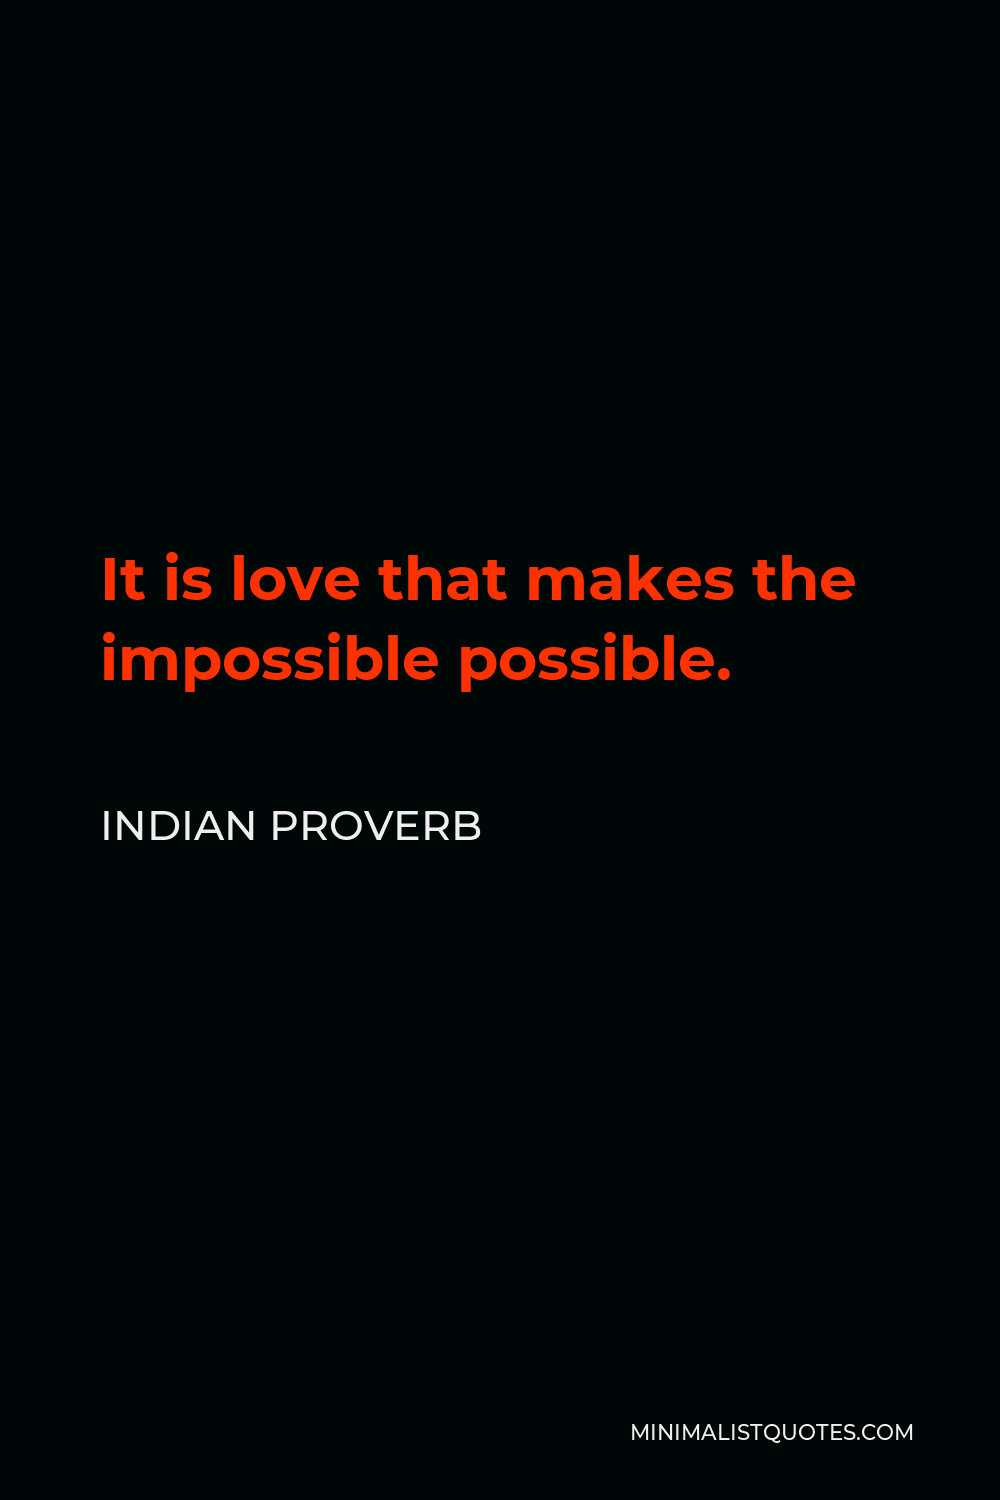 Indian Proverb Quote - It is love that makes the impossible possible.